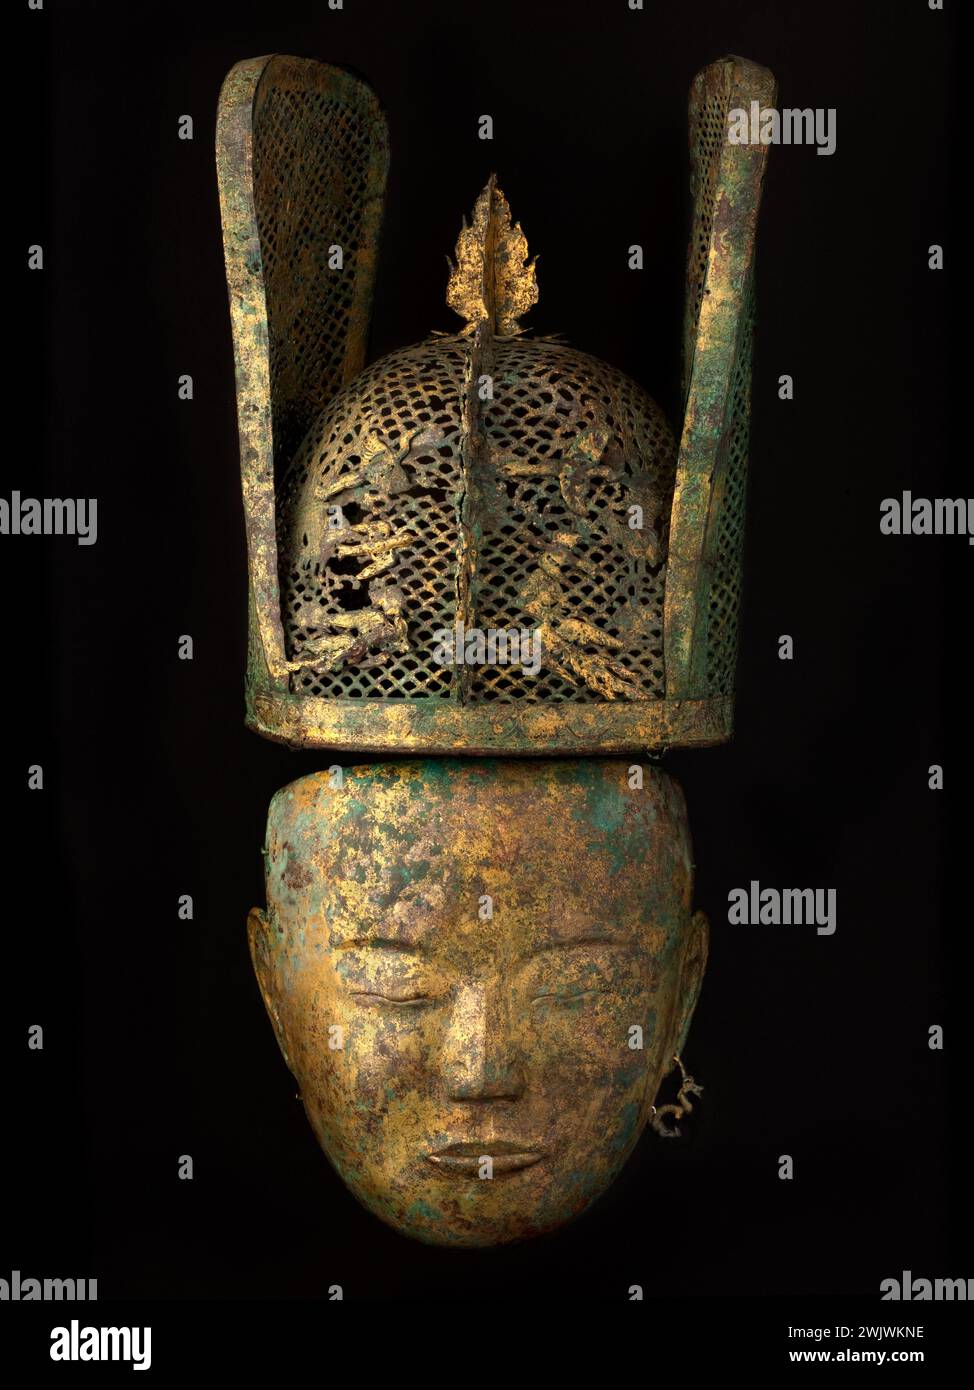 Funeral set, female mask and female cap with fins. Golden metal, 1st quarter of the 12th century, Liao dynasty (907-1125), interior Mongolia or Liaoning. Paris, Cernuschi museum. 51556-9 Ailette, Asian art, Chinese art, funeral art, Mongolian art, beyond, bronze gilding, female headdress, funeral costume, custom, belief, liao dynasty, woman, female mask, funeral mask, death, funeral adornment, rite, rite Funeral, 12th XII 12th 12th 12th century, Firm eyes Stock Photo